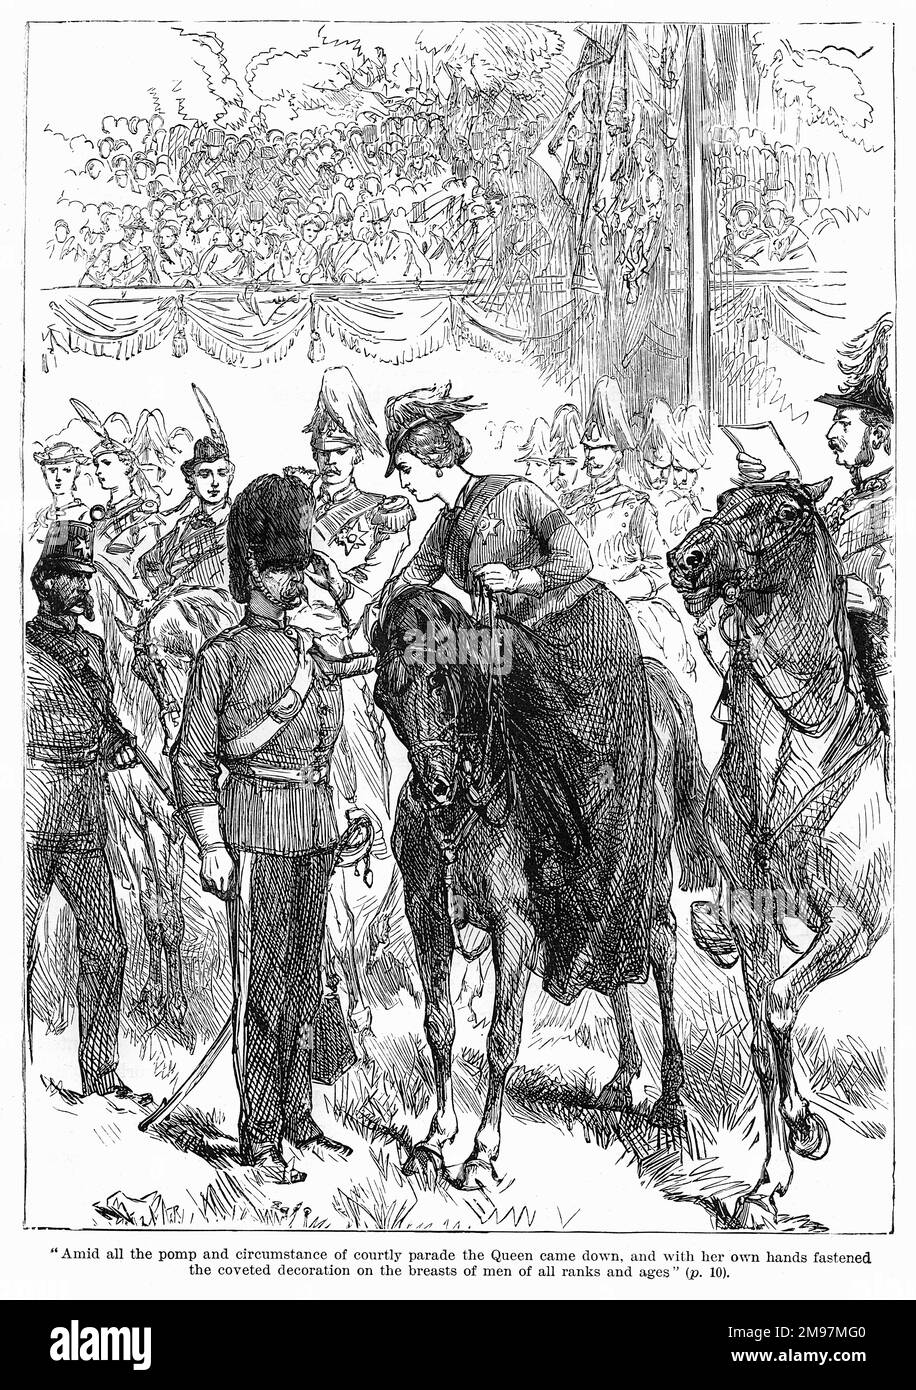 Queen Victoria awarding medals in Hyde Park, London, to those who had fought in the Indian Mutiny, the Crimean War and other conflicts. Stock Photo